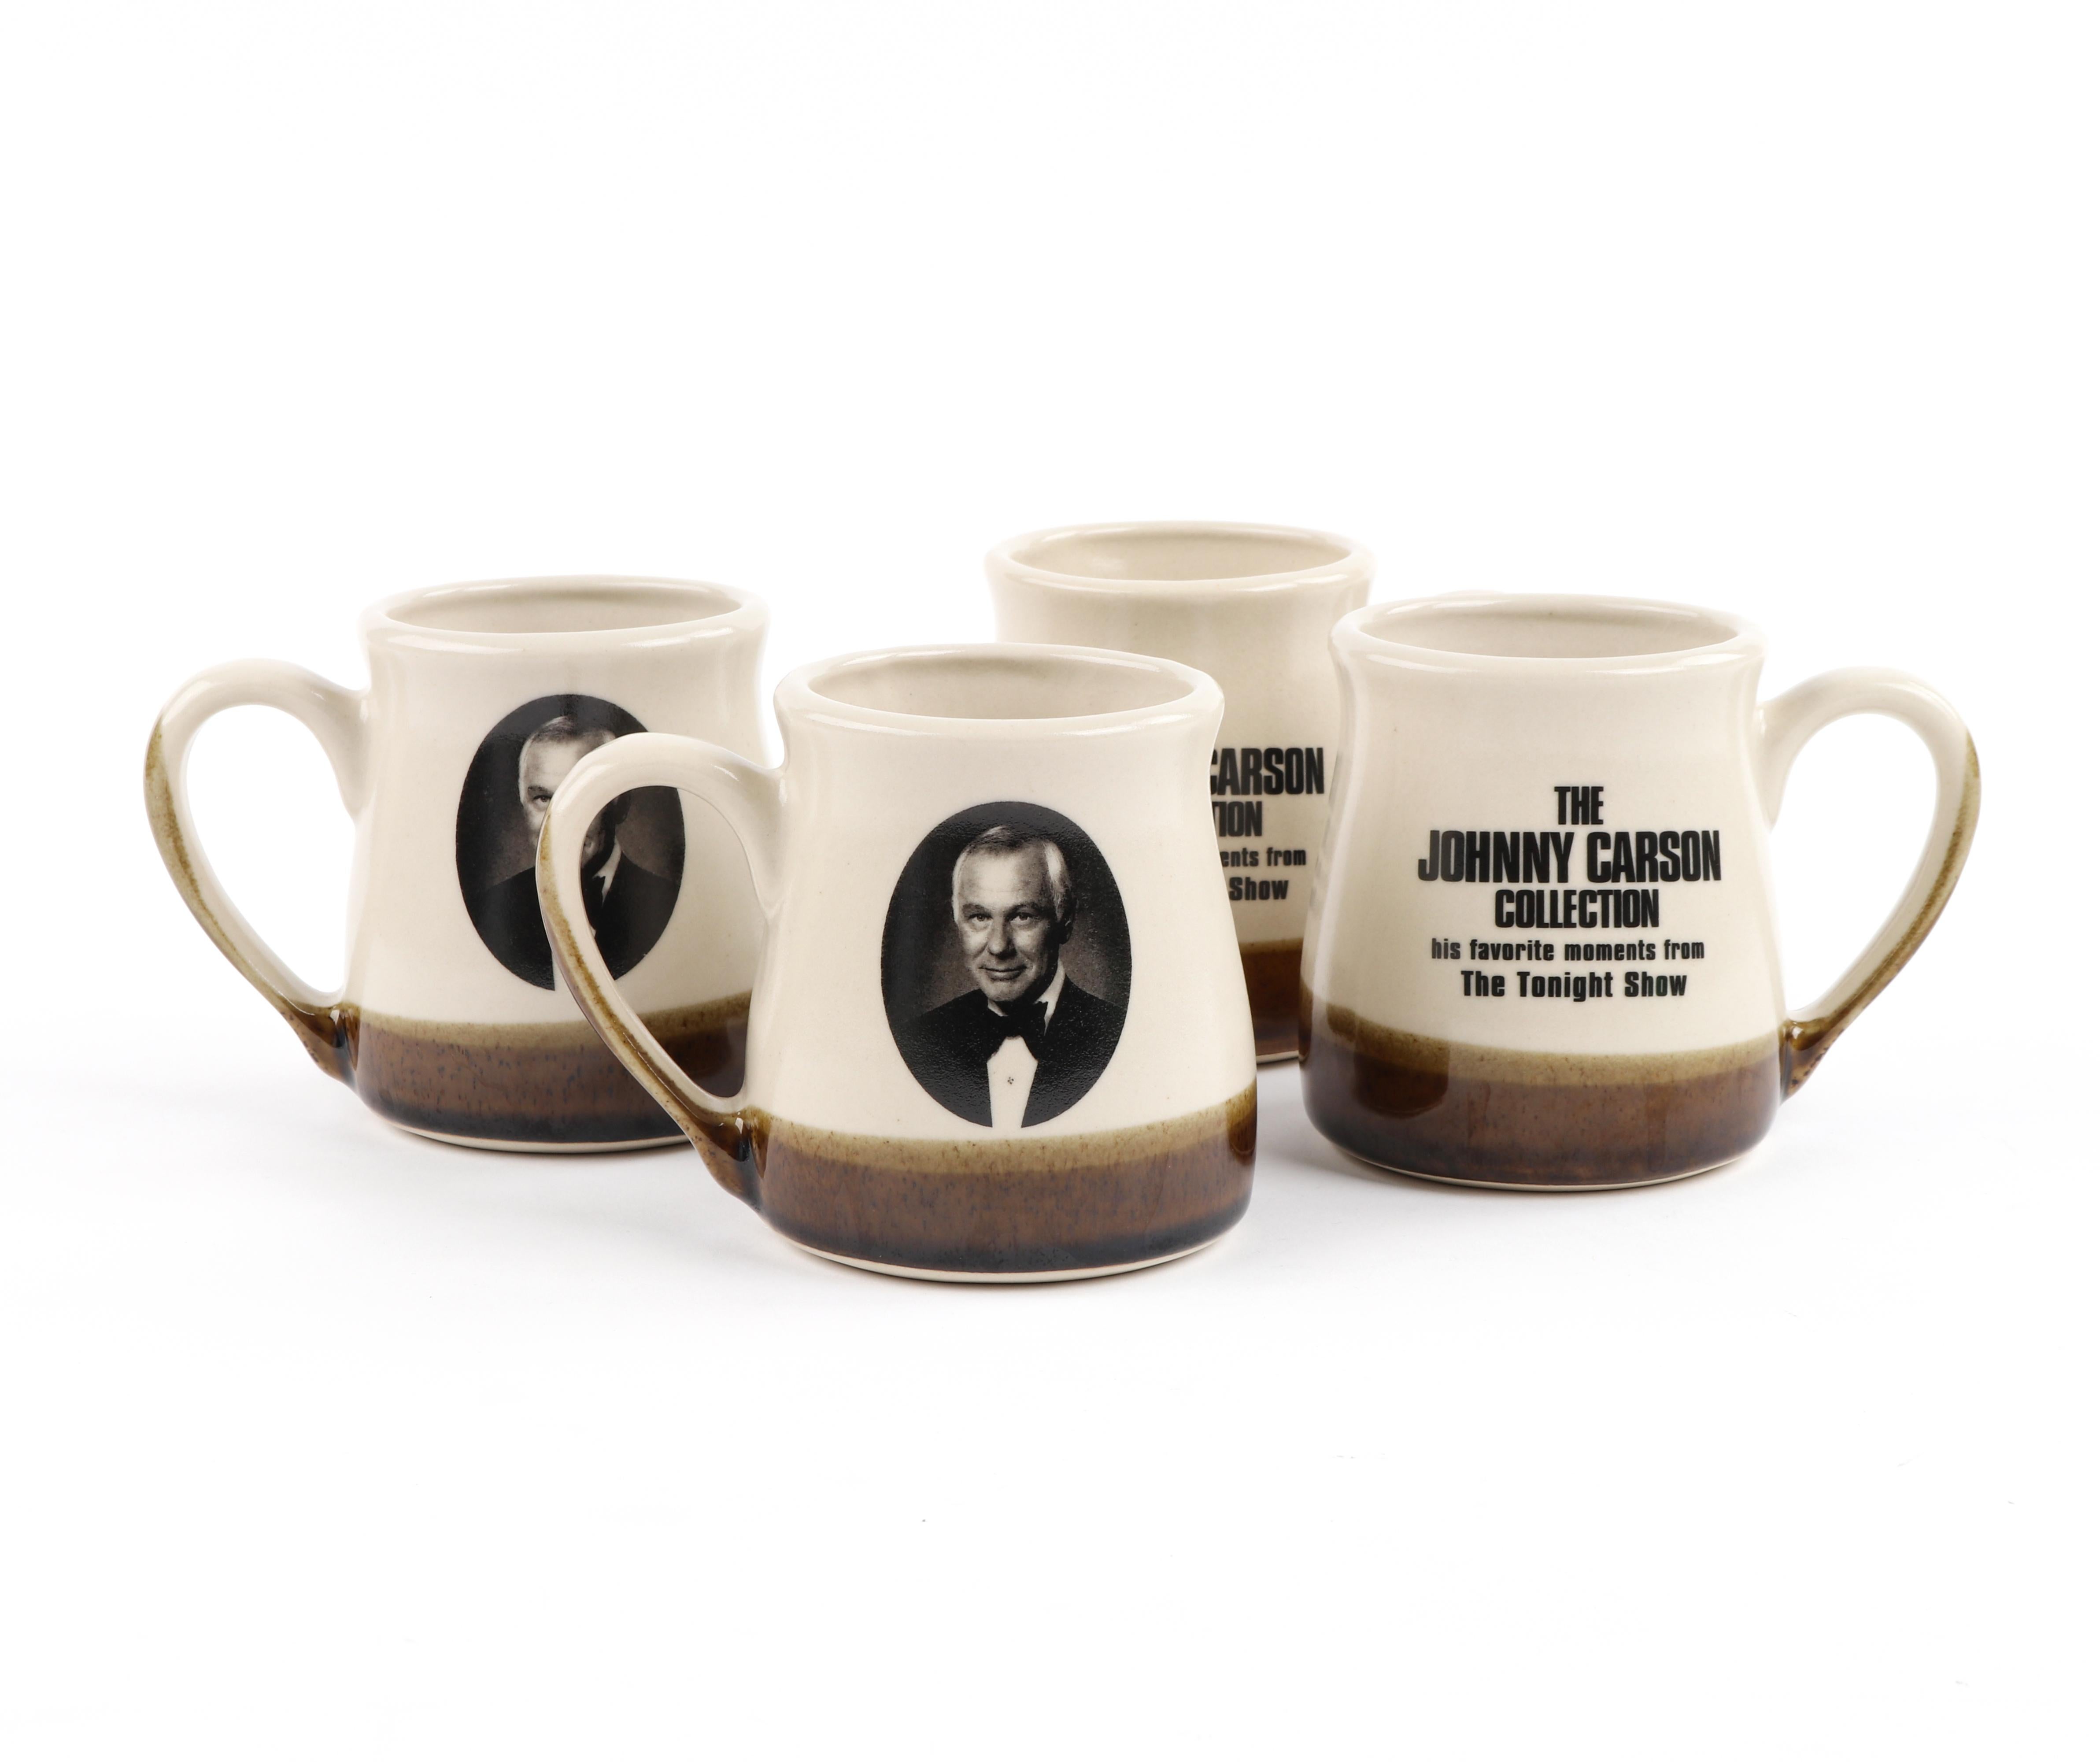 Johnny Carson Collection Tonight Show Ceramic Coffee Cups Mugs 4pc Set Rare

Rare set of four coffee mugs depicting a black and white cameo photo of comedian and television host Johnny Carson featured on one side and, 